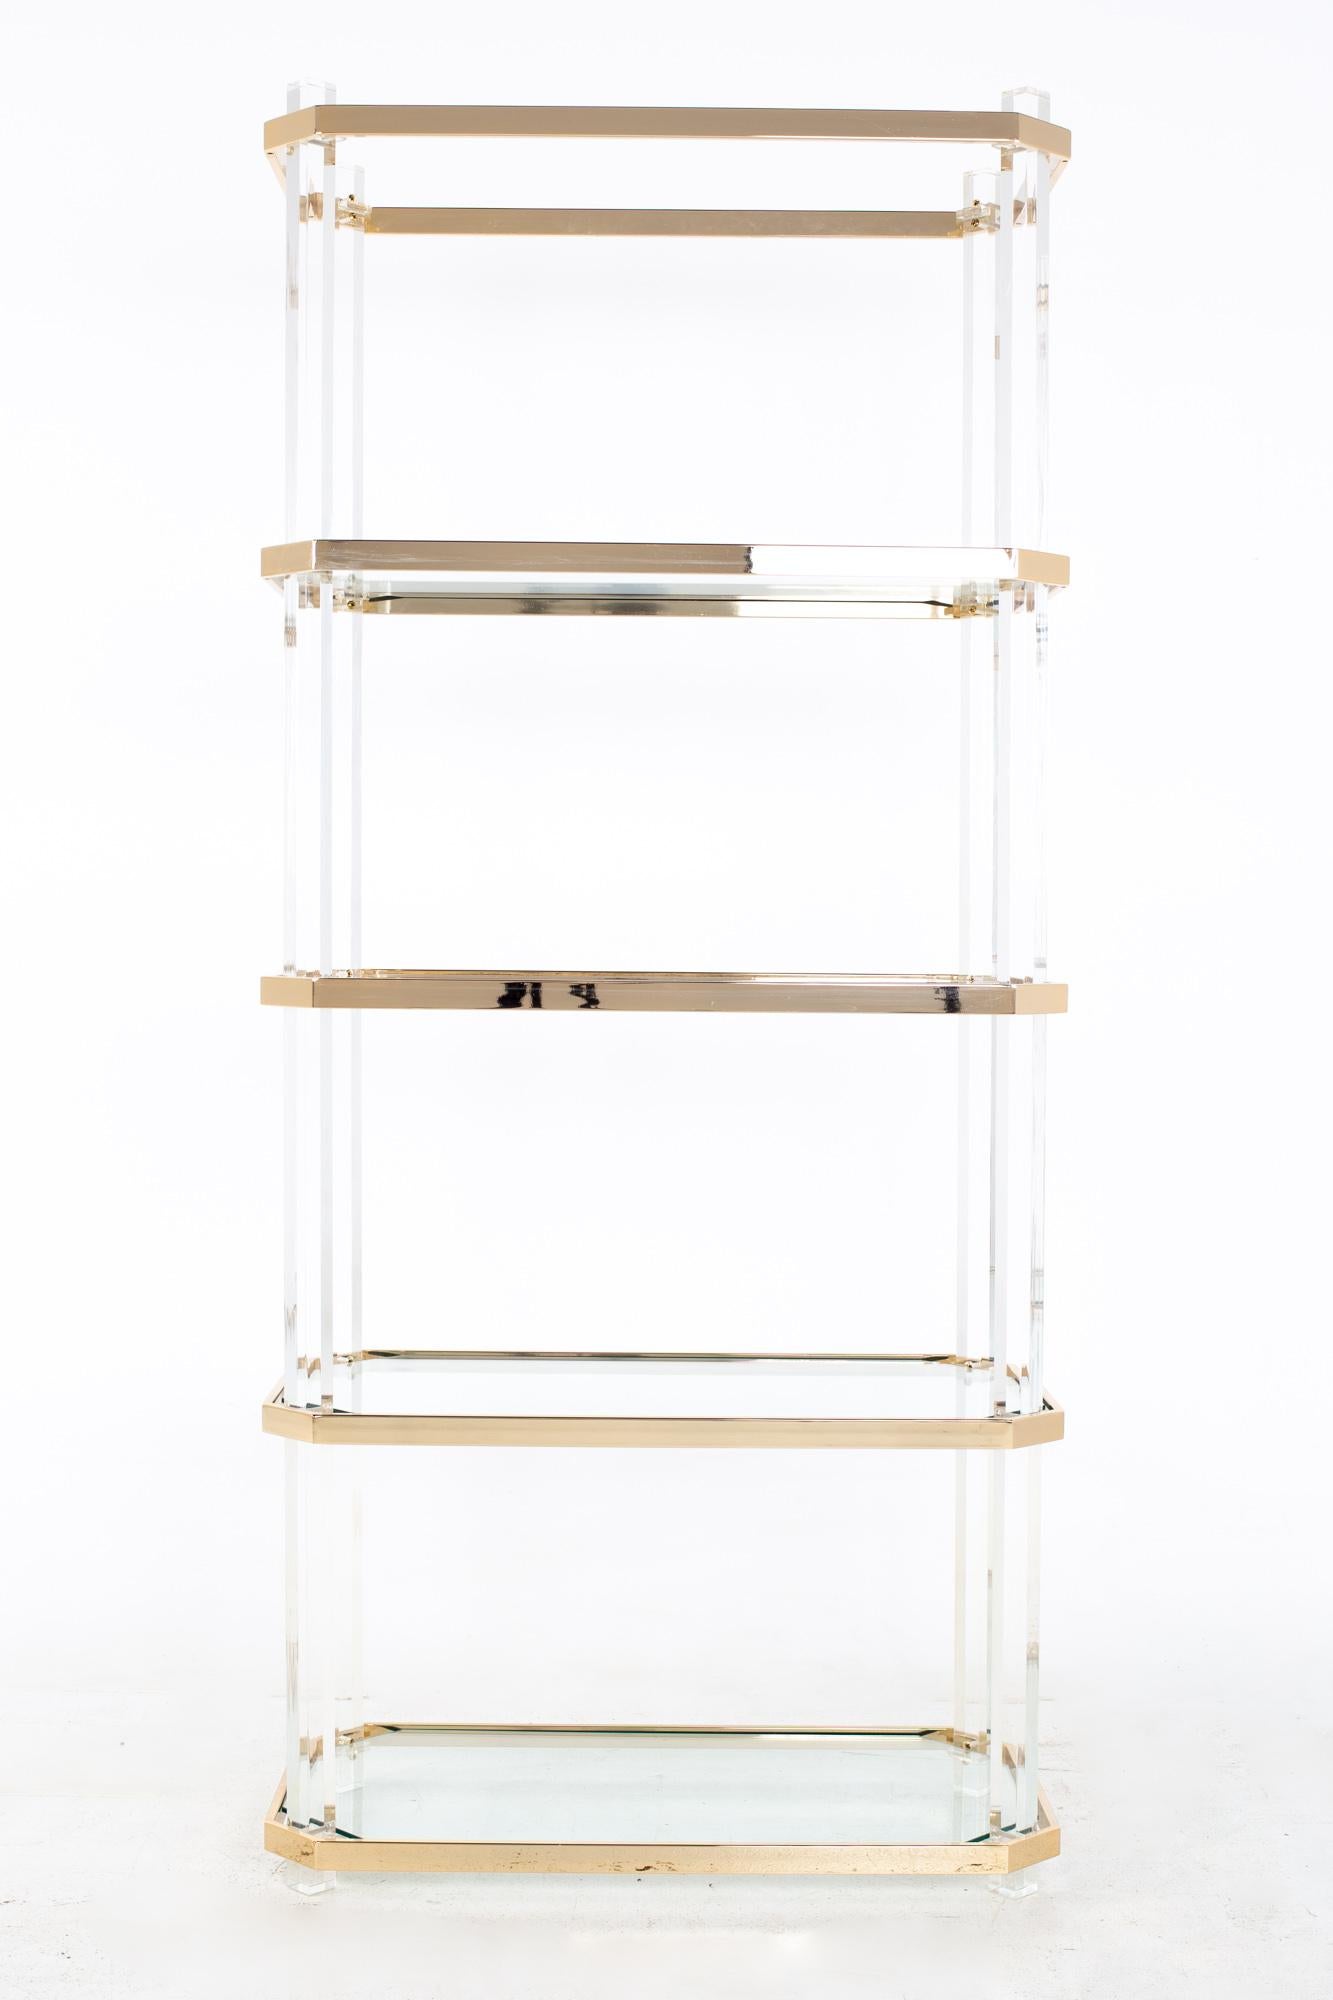 Charles Hollis Jones style mid century brass and lucite etagere
Etagere measures: 32 wide x 16 deep x 70 inches high

All pieces of furniture can be had in what we call restored vintage condition. That means the piece is restored upon purchase so